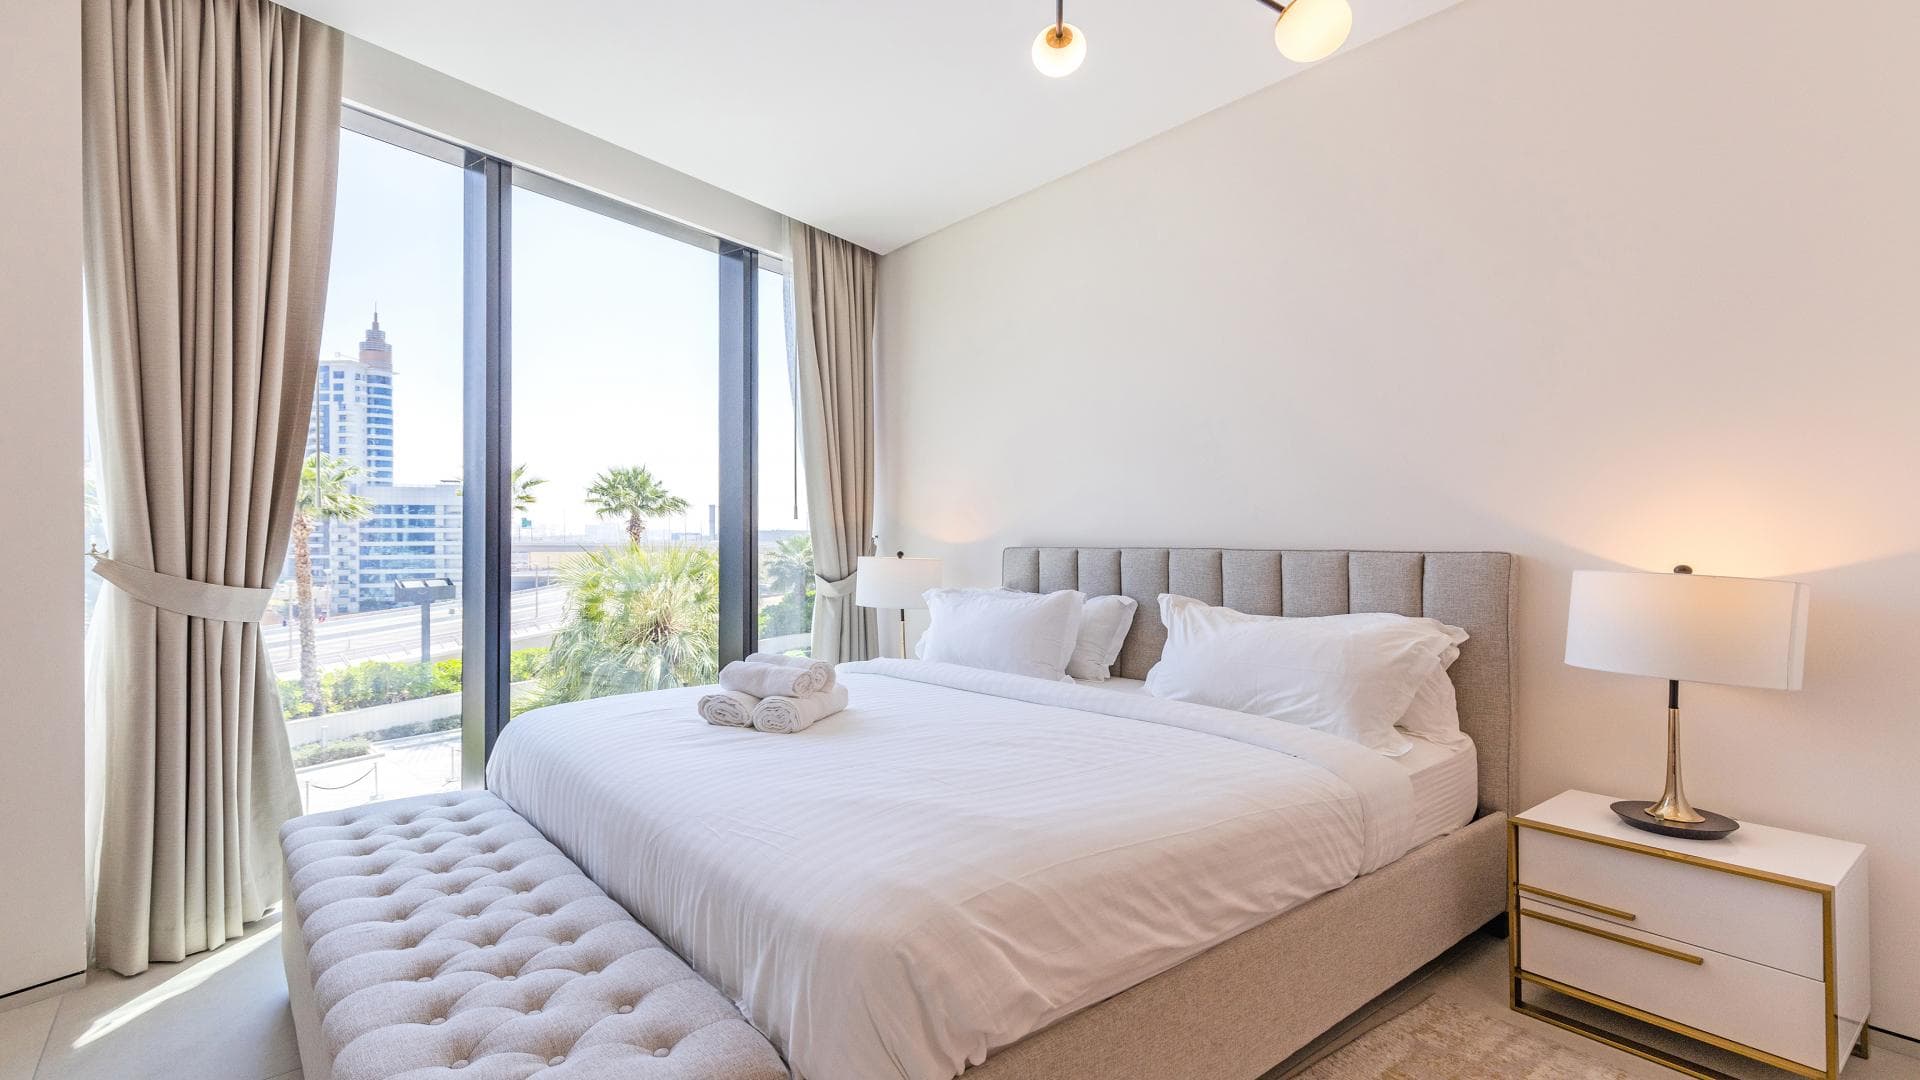 1 Bedroom Apartment For Sale The Address Jumeirah Resort And Spa Lp36575 1ca49a8414e82200.jpg